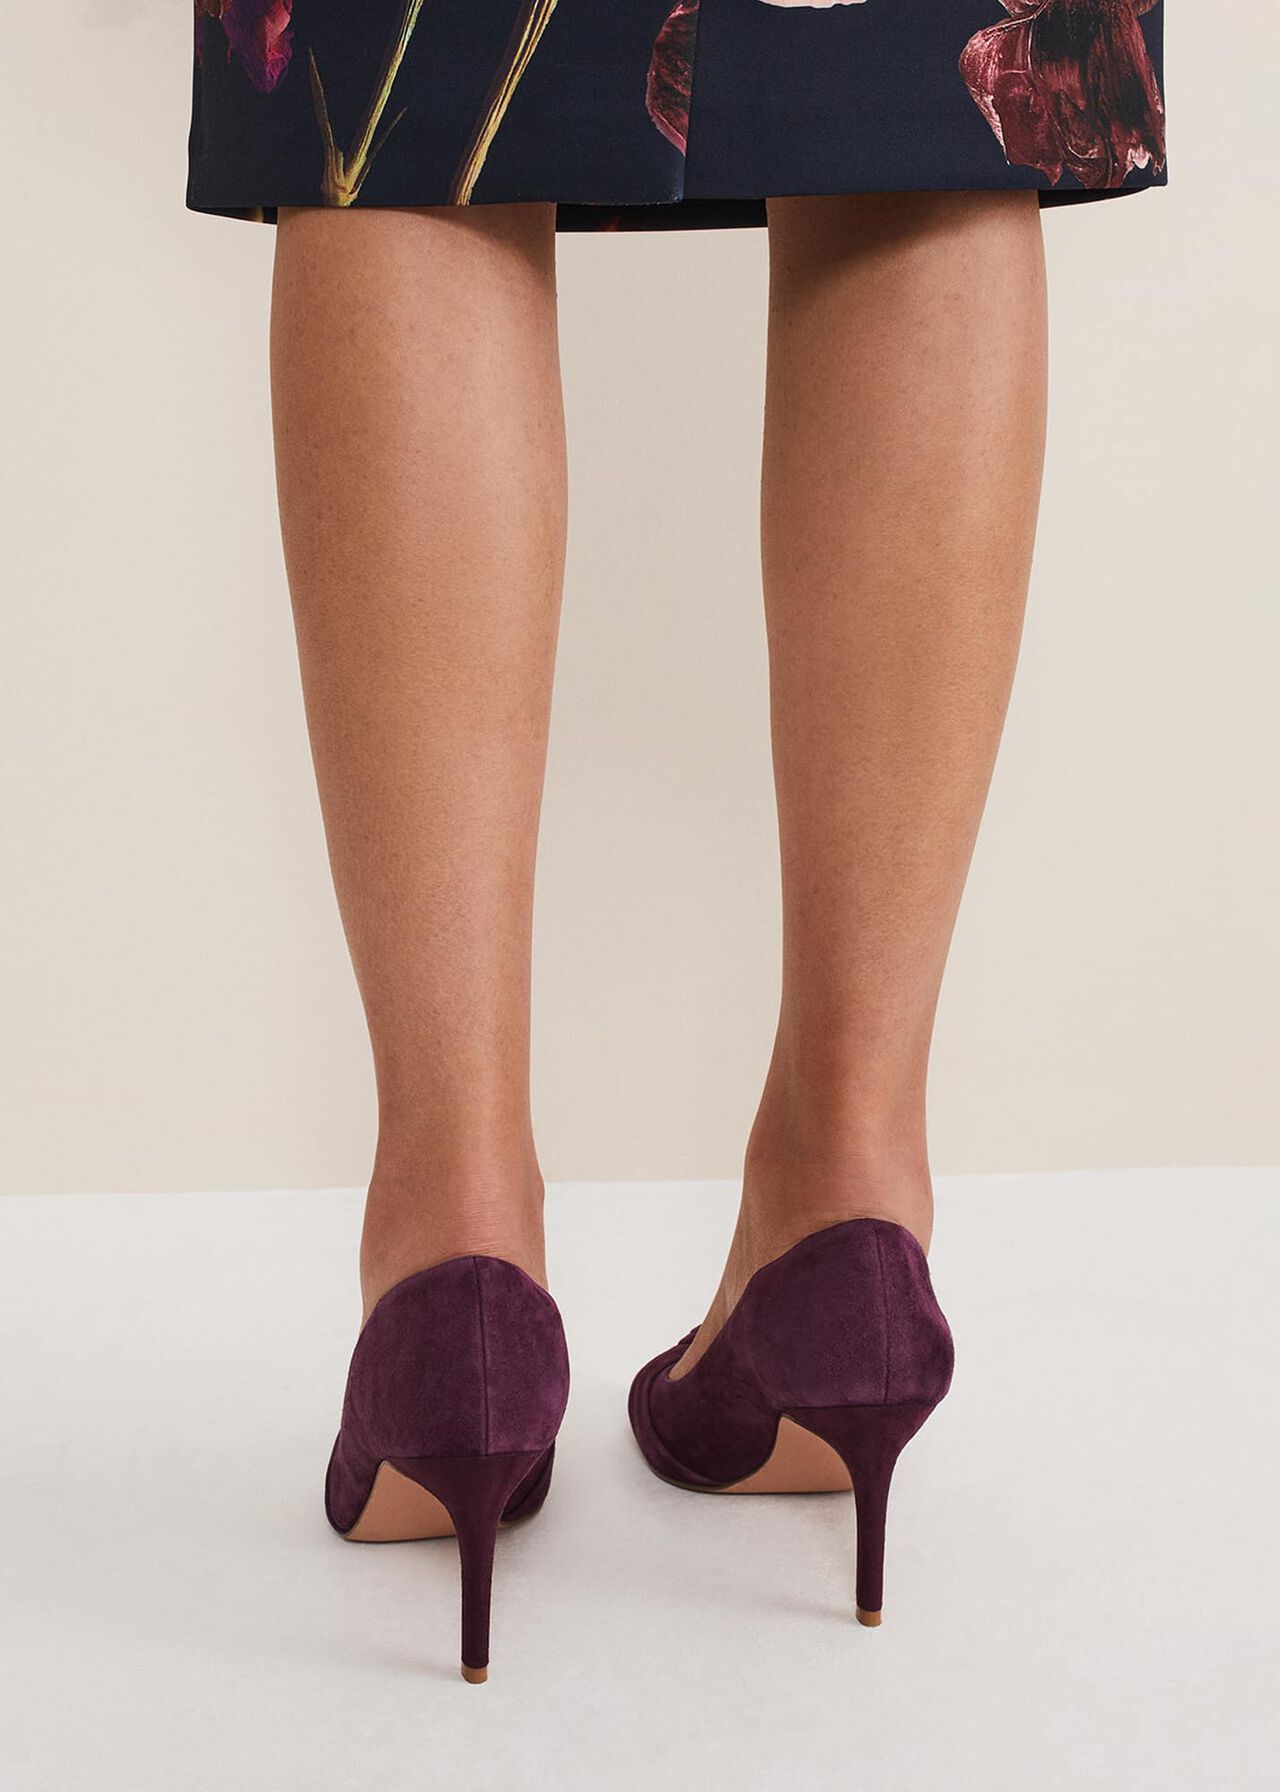 Knot Front Suede Court Shoe